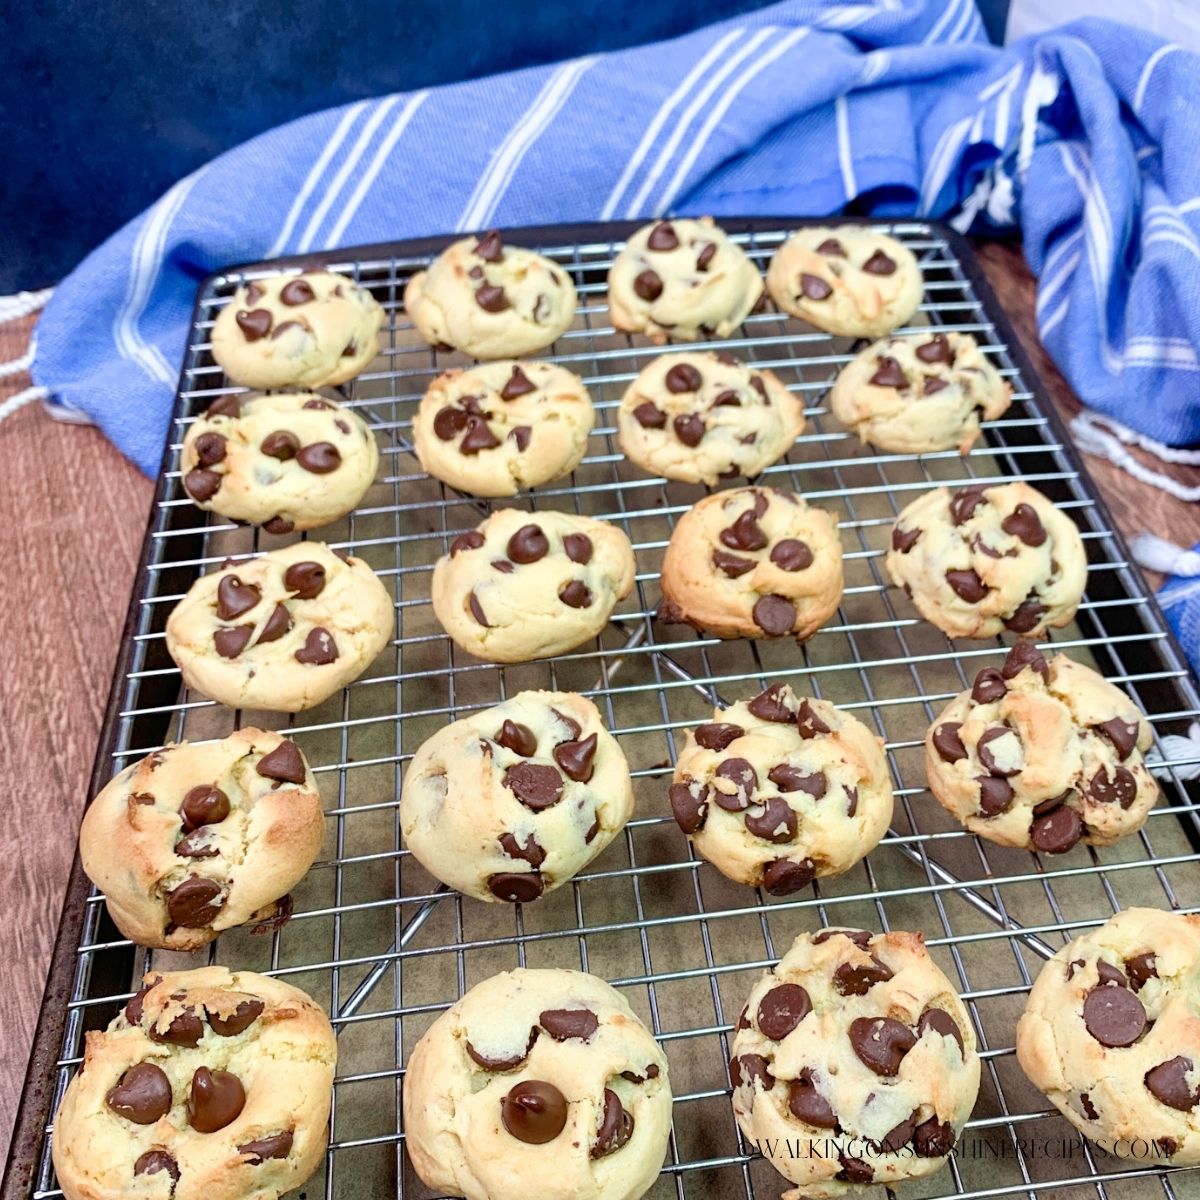 Chocolate Chip Cookies from Cake Mix